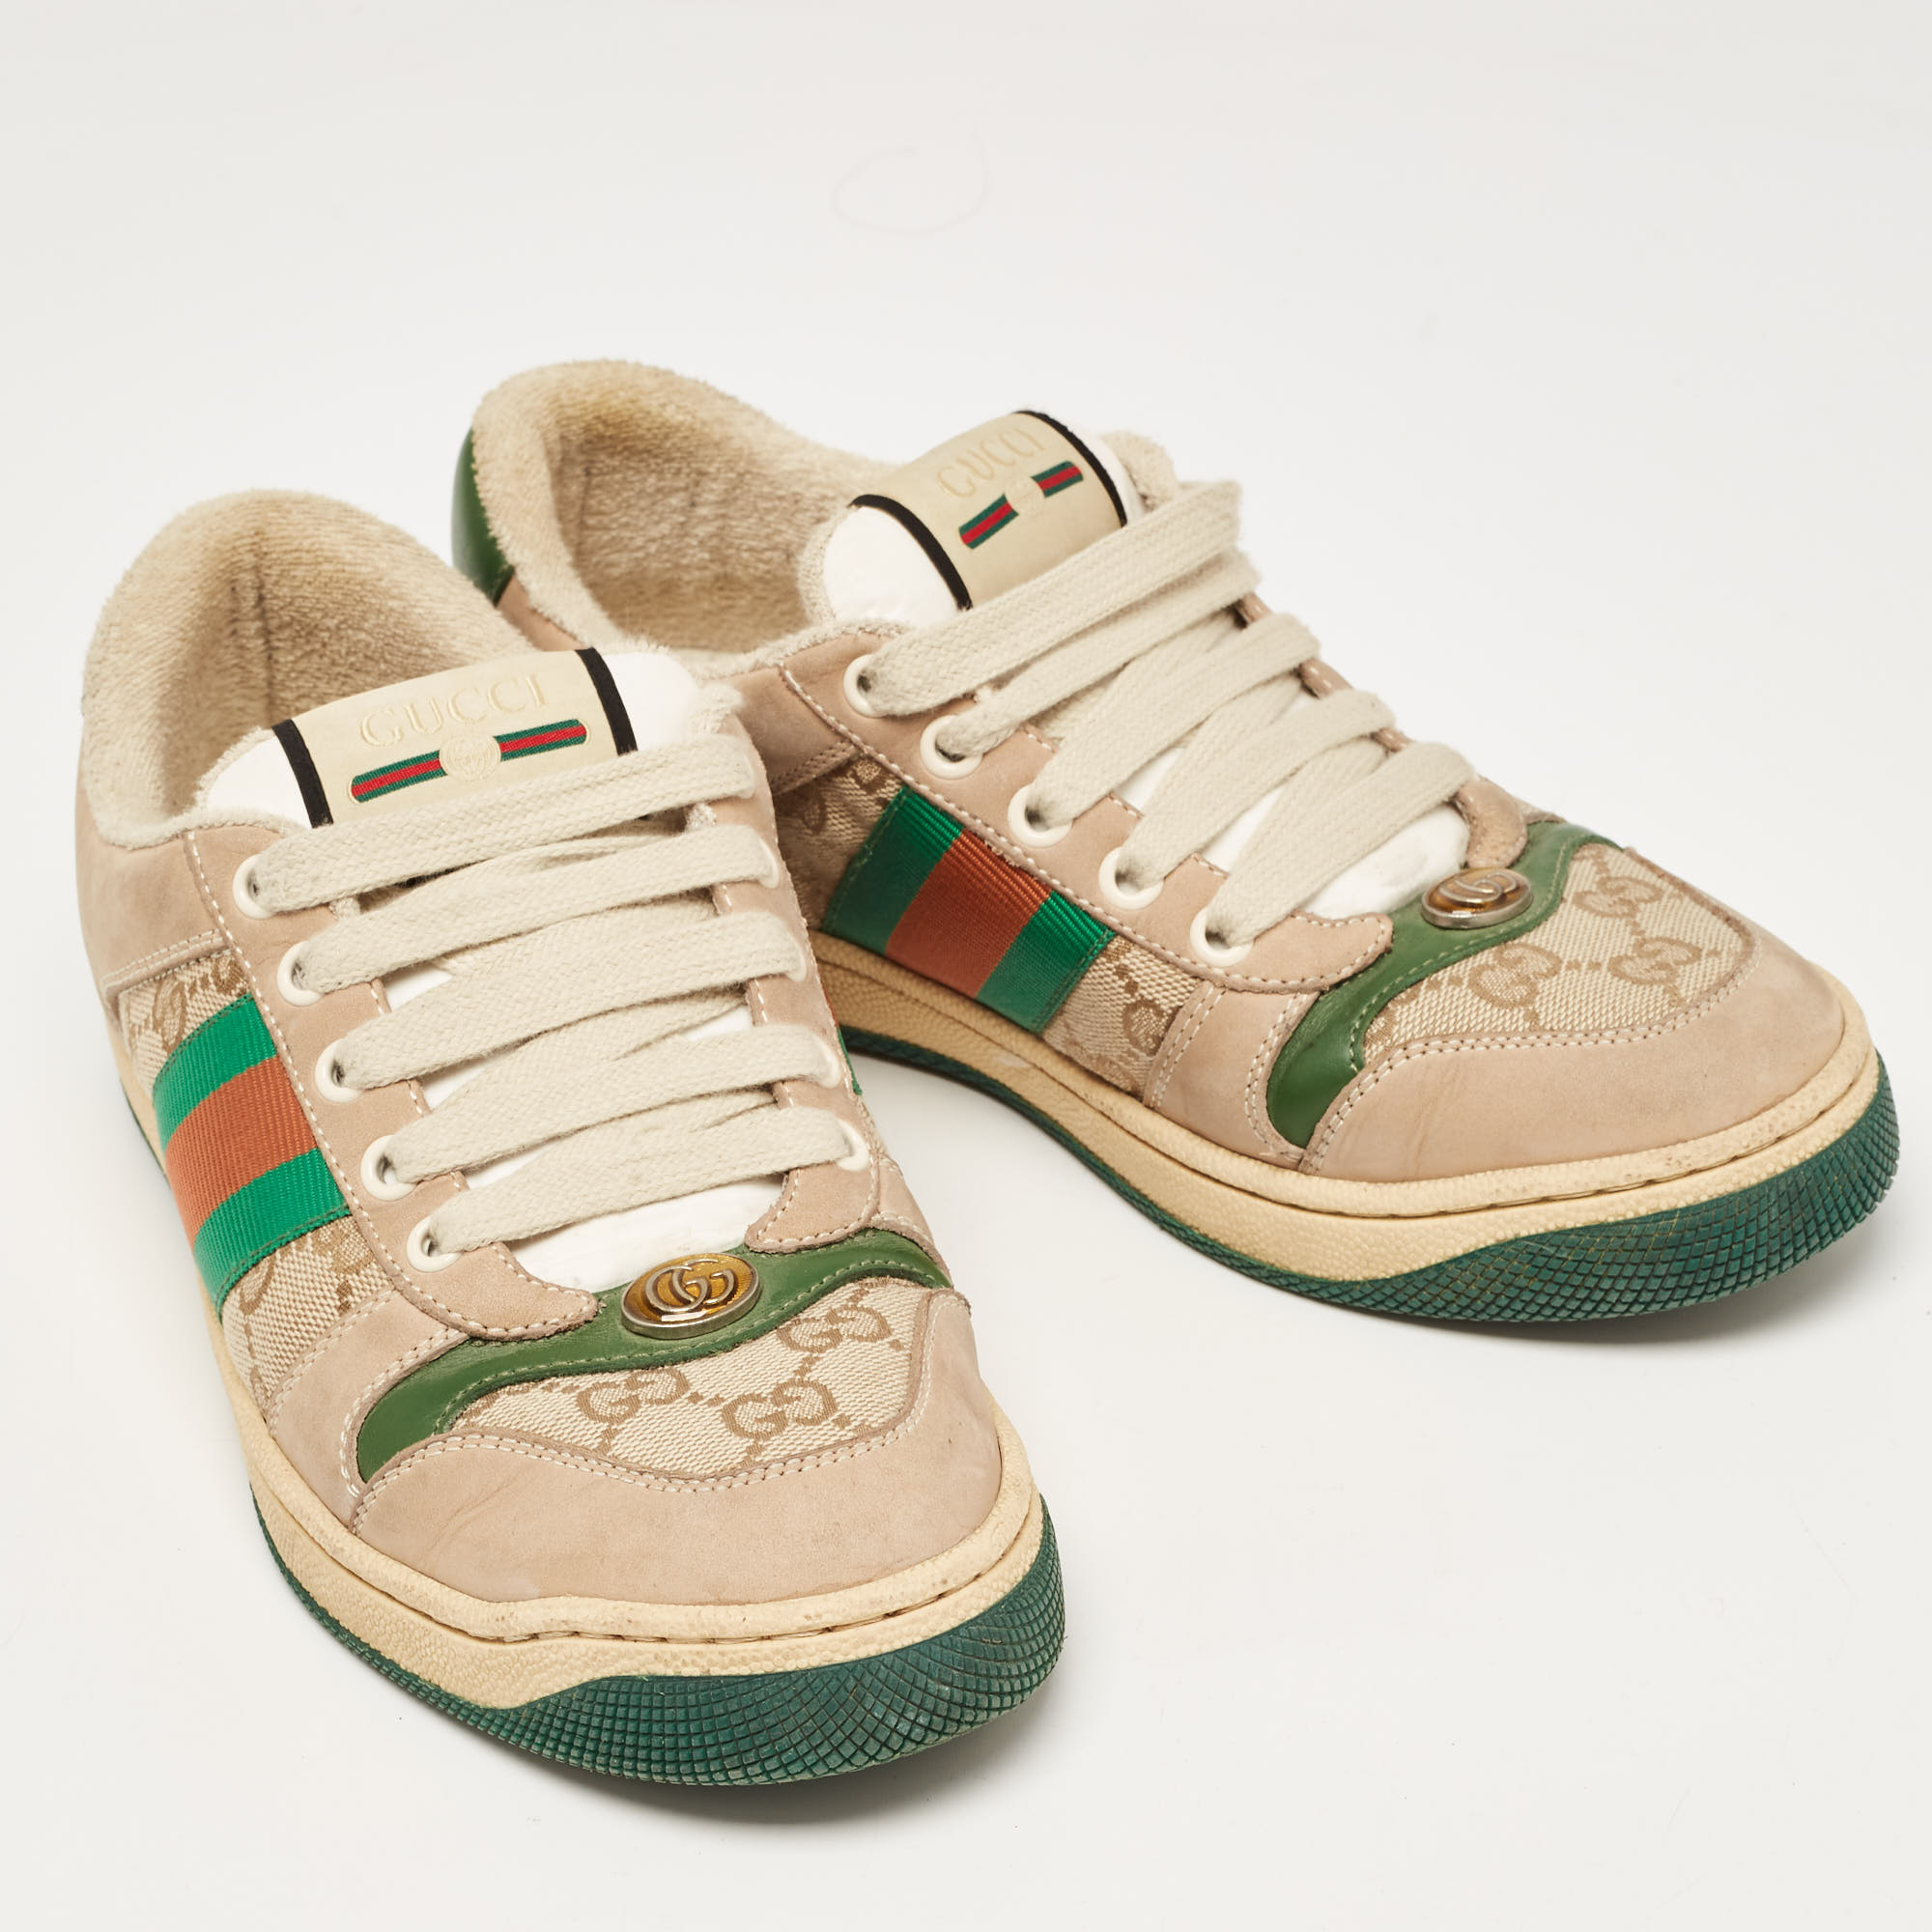 Gucci Multicolor Nubuck And Leather Screener Sneakers Size 37